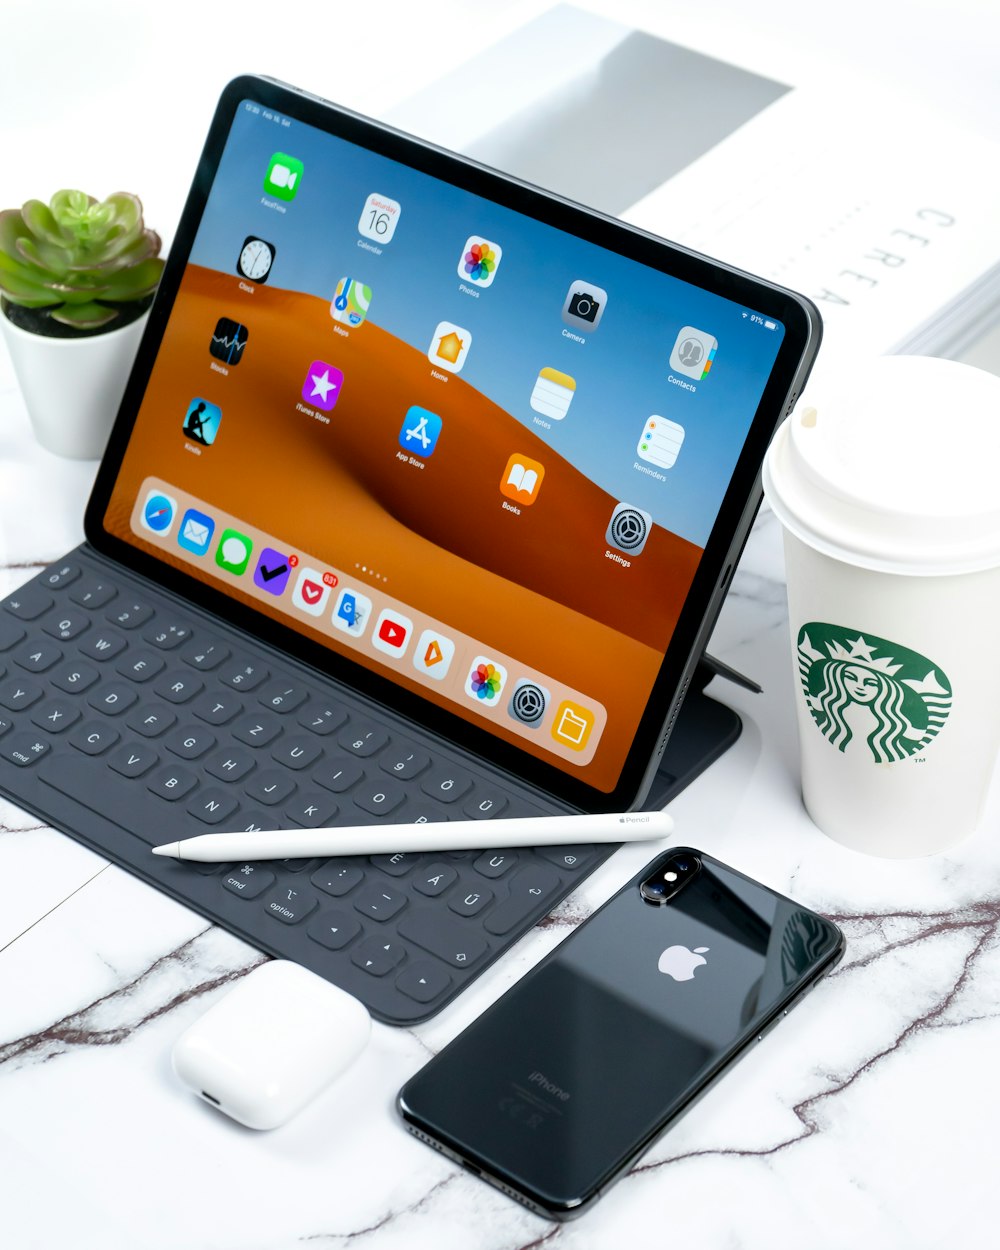 turned on iPad beside space gray iPhone X and Starbucks coffee cup